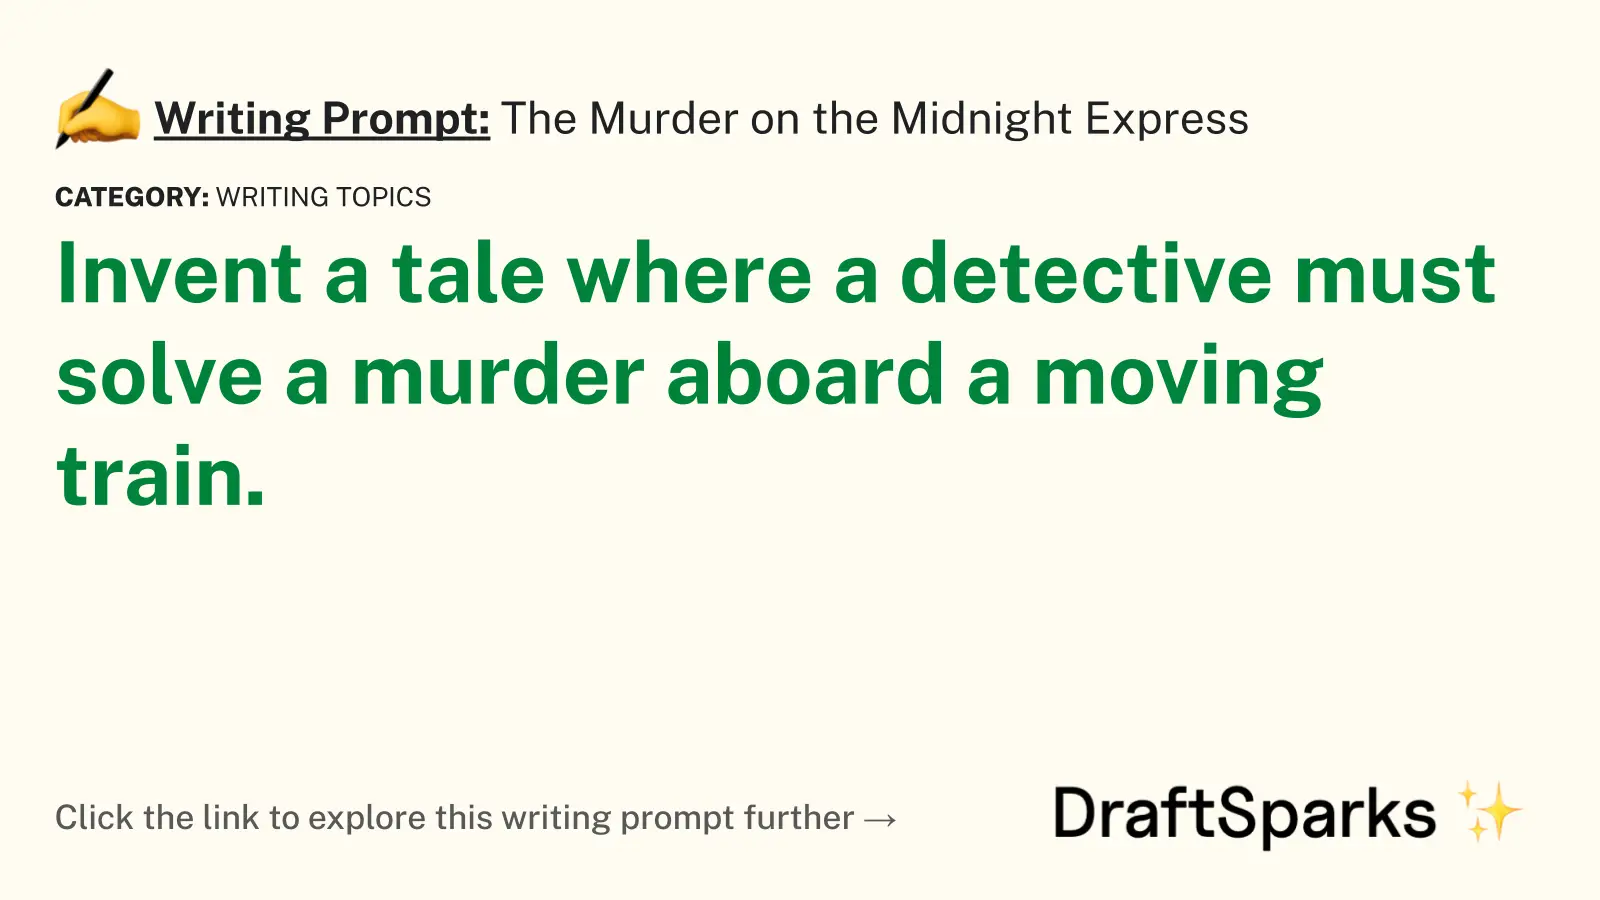 The Murder on the Midnight Express